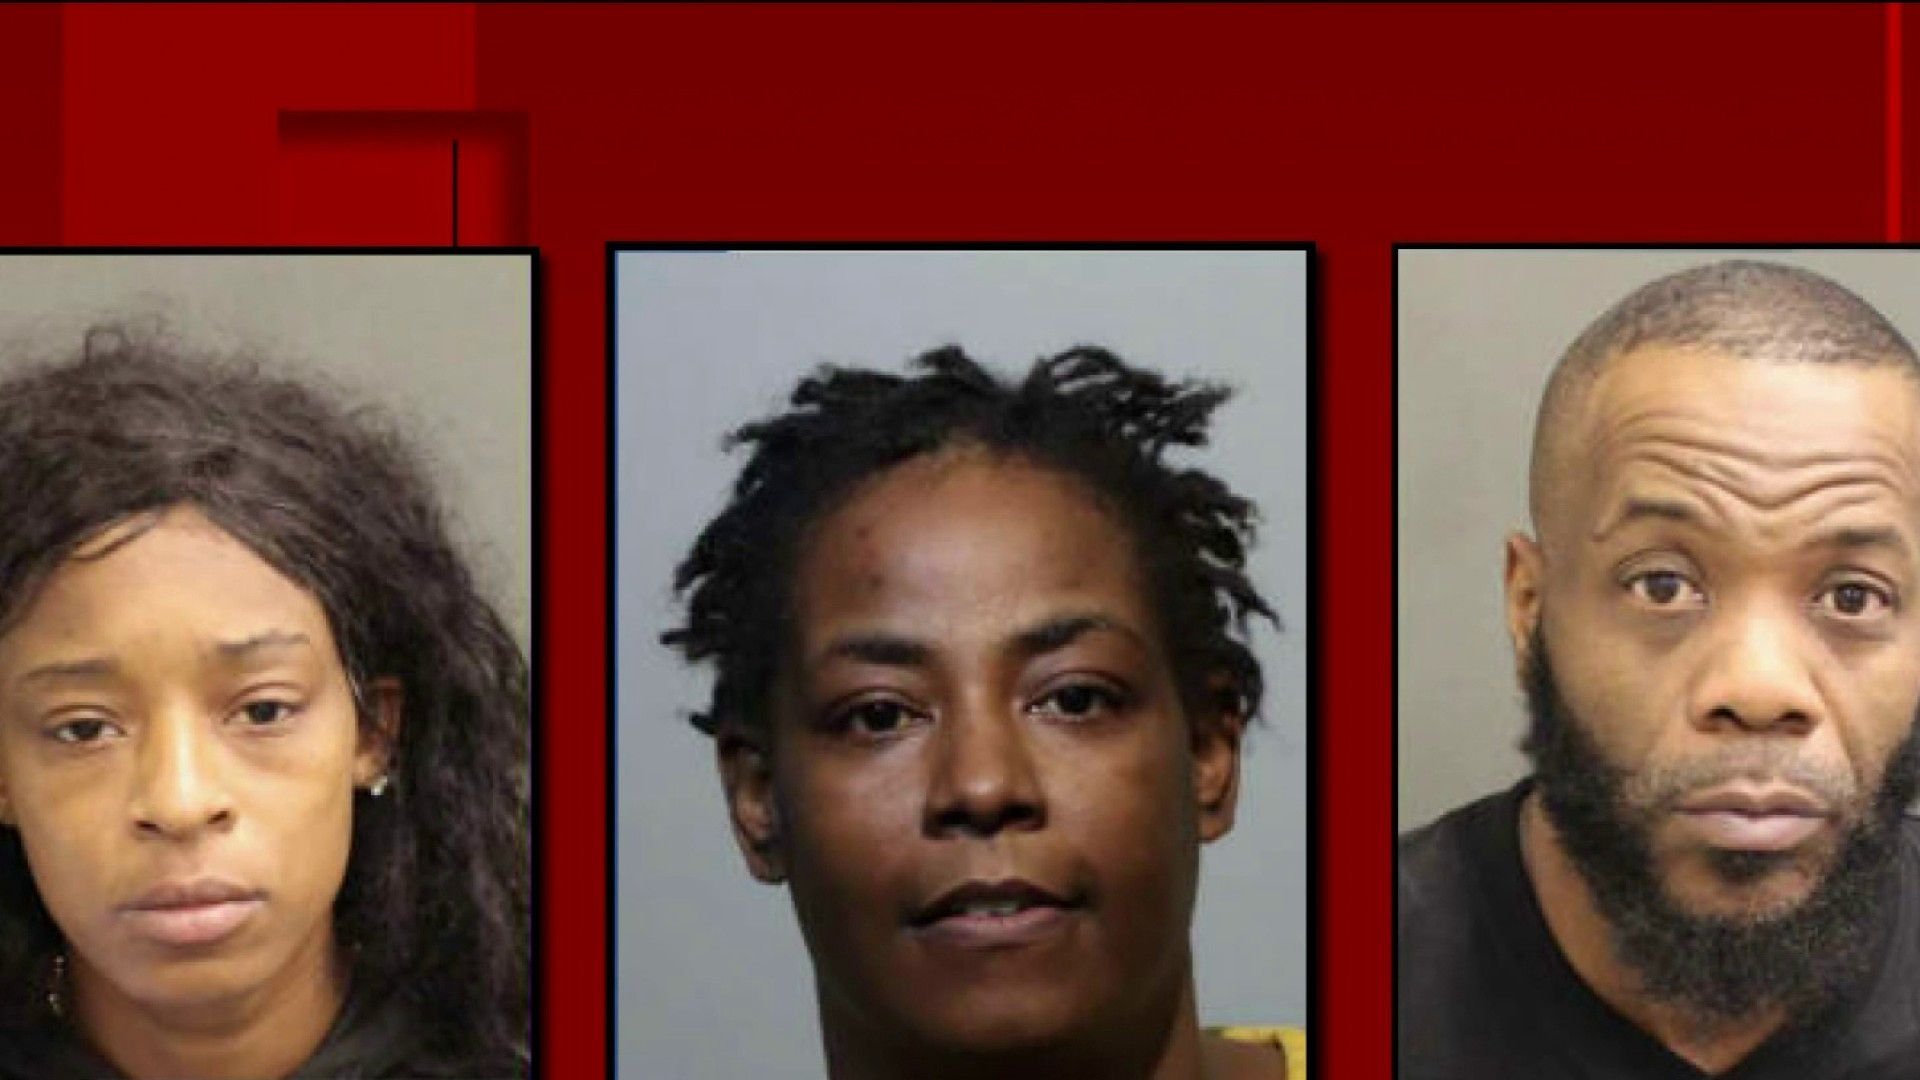 4 arrested after 15-year-old worked as stripper at Orlando club, police photo